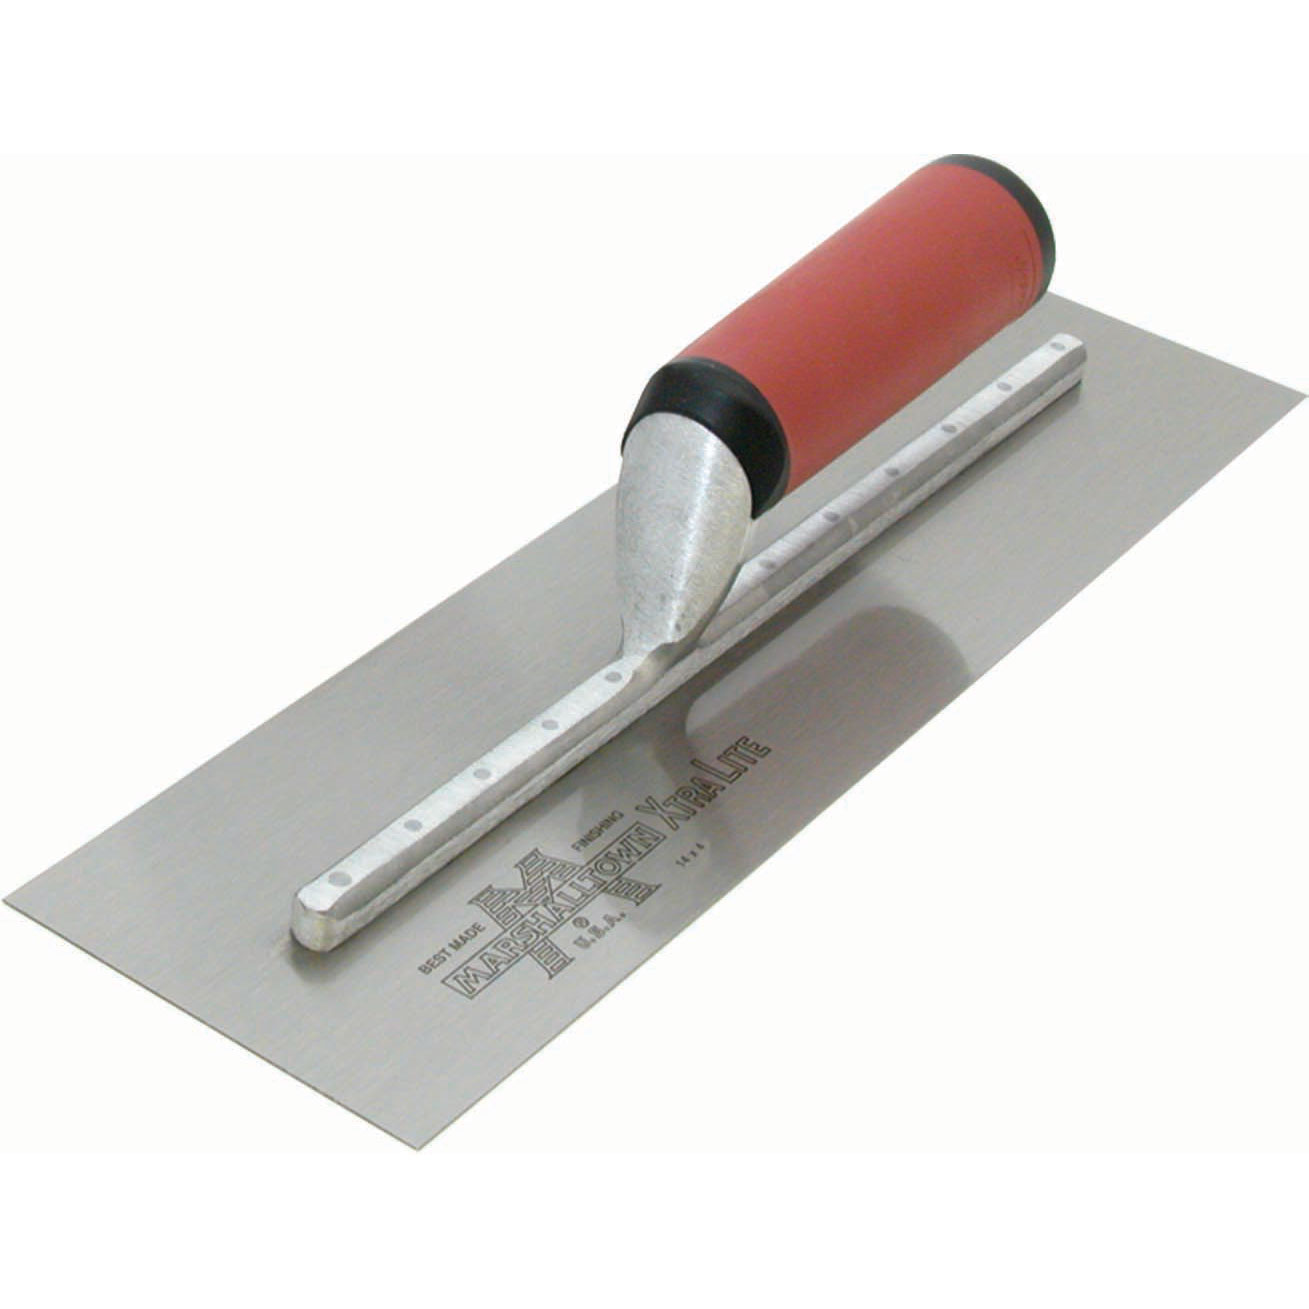 Marshalltown MX81D 18in x 4in Finishing Trowel with Straight DuraSoft Handle MX81D